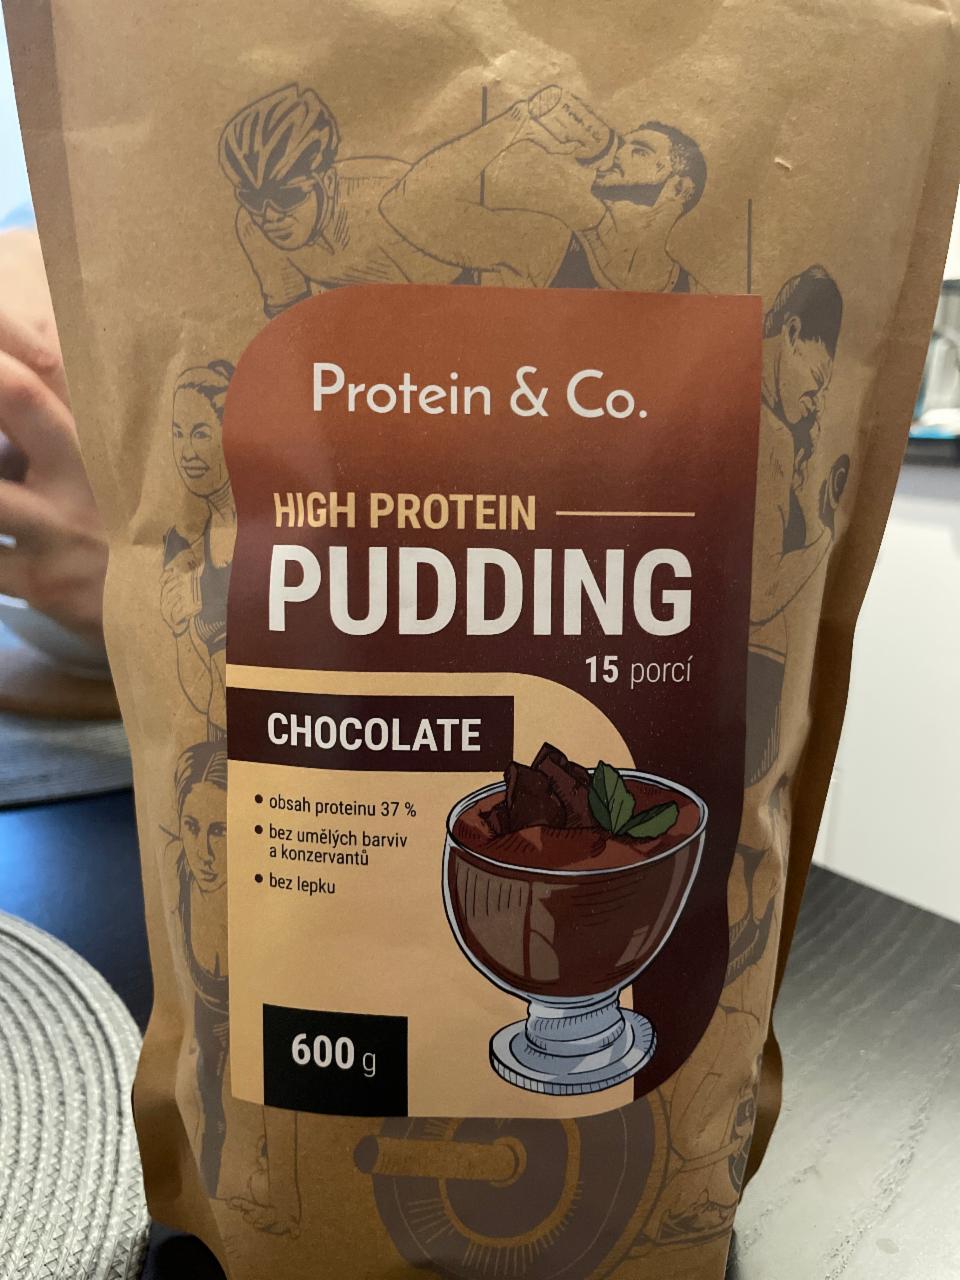 Fotografie - High protein pudding Chocolate Protein & Co.